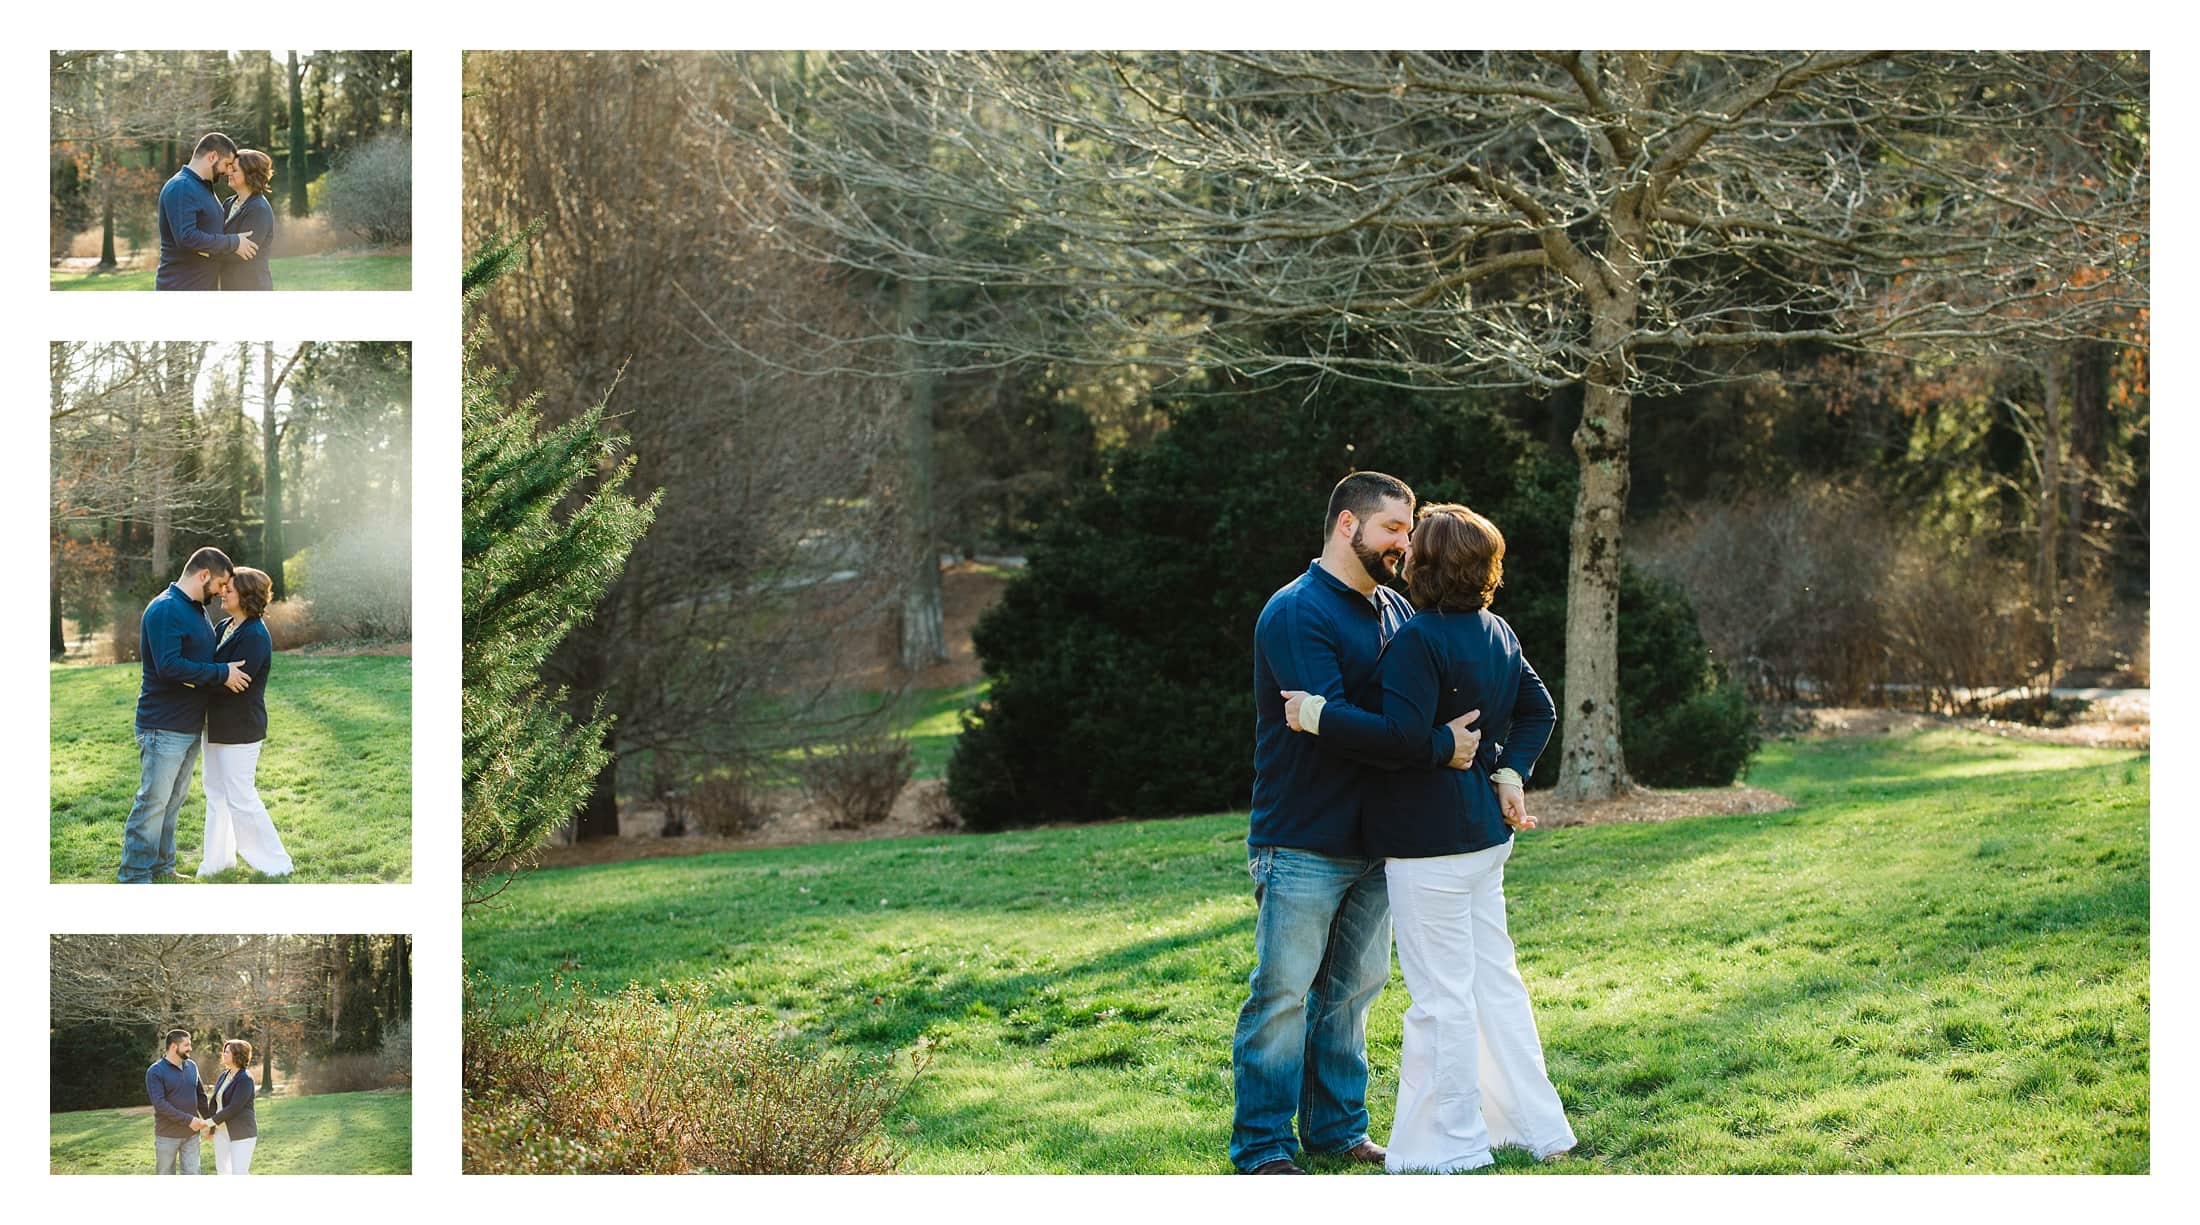 Couple standing in garden area surrounded by greenery.